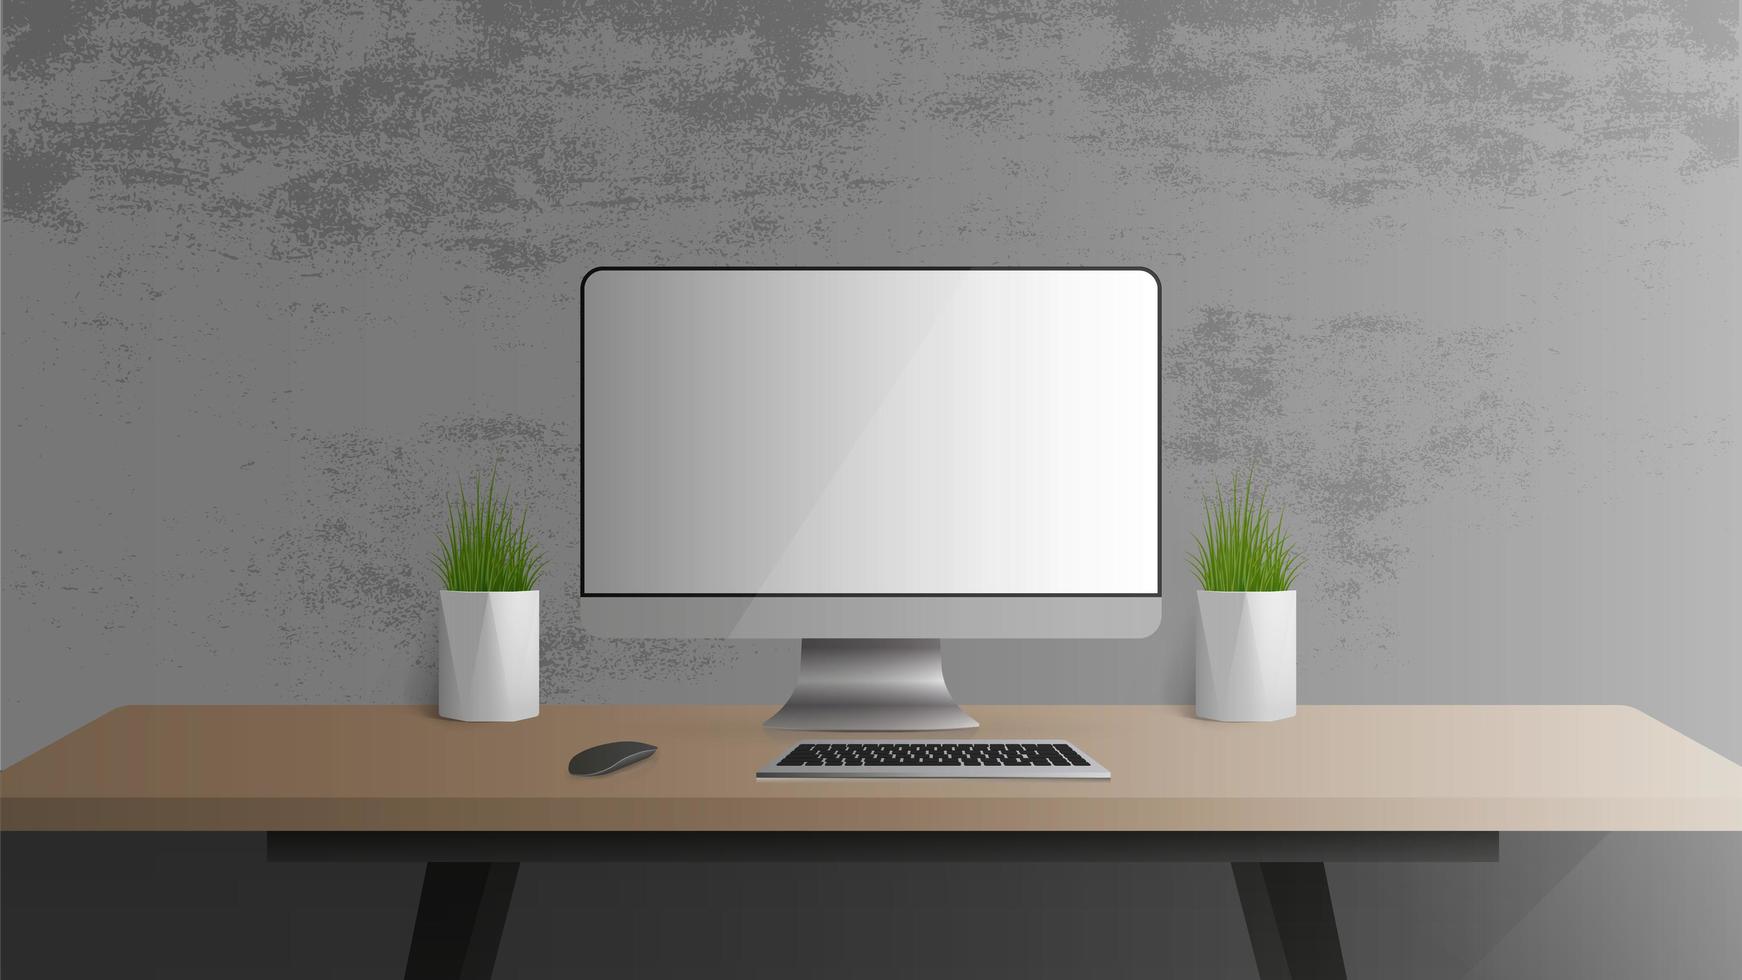 Office workplace. Monitor, keyboard, computer mouse, table lamp, houseplant. Vector. vector